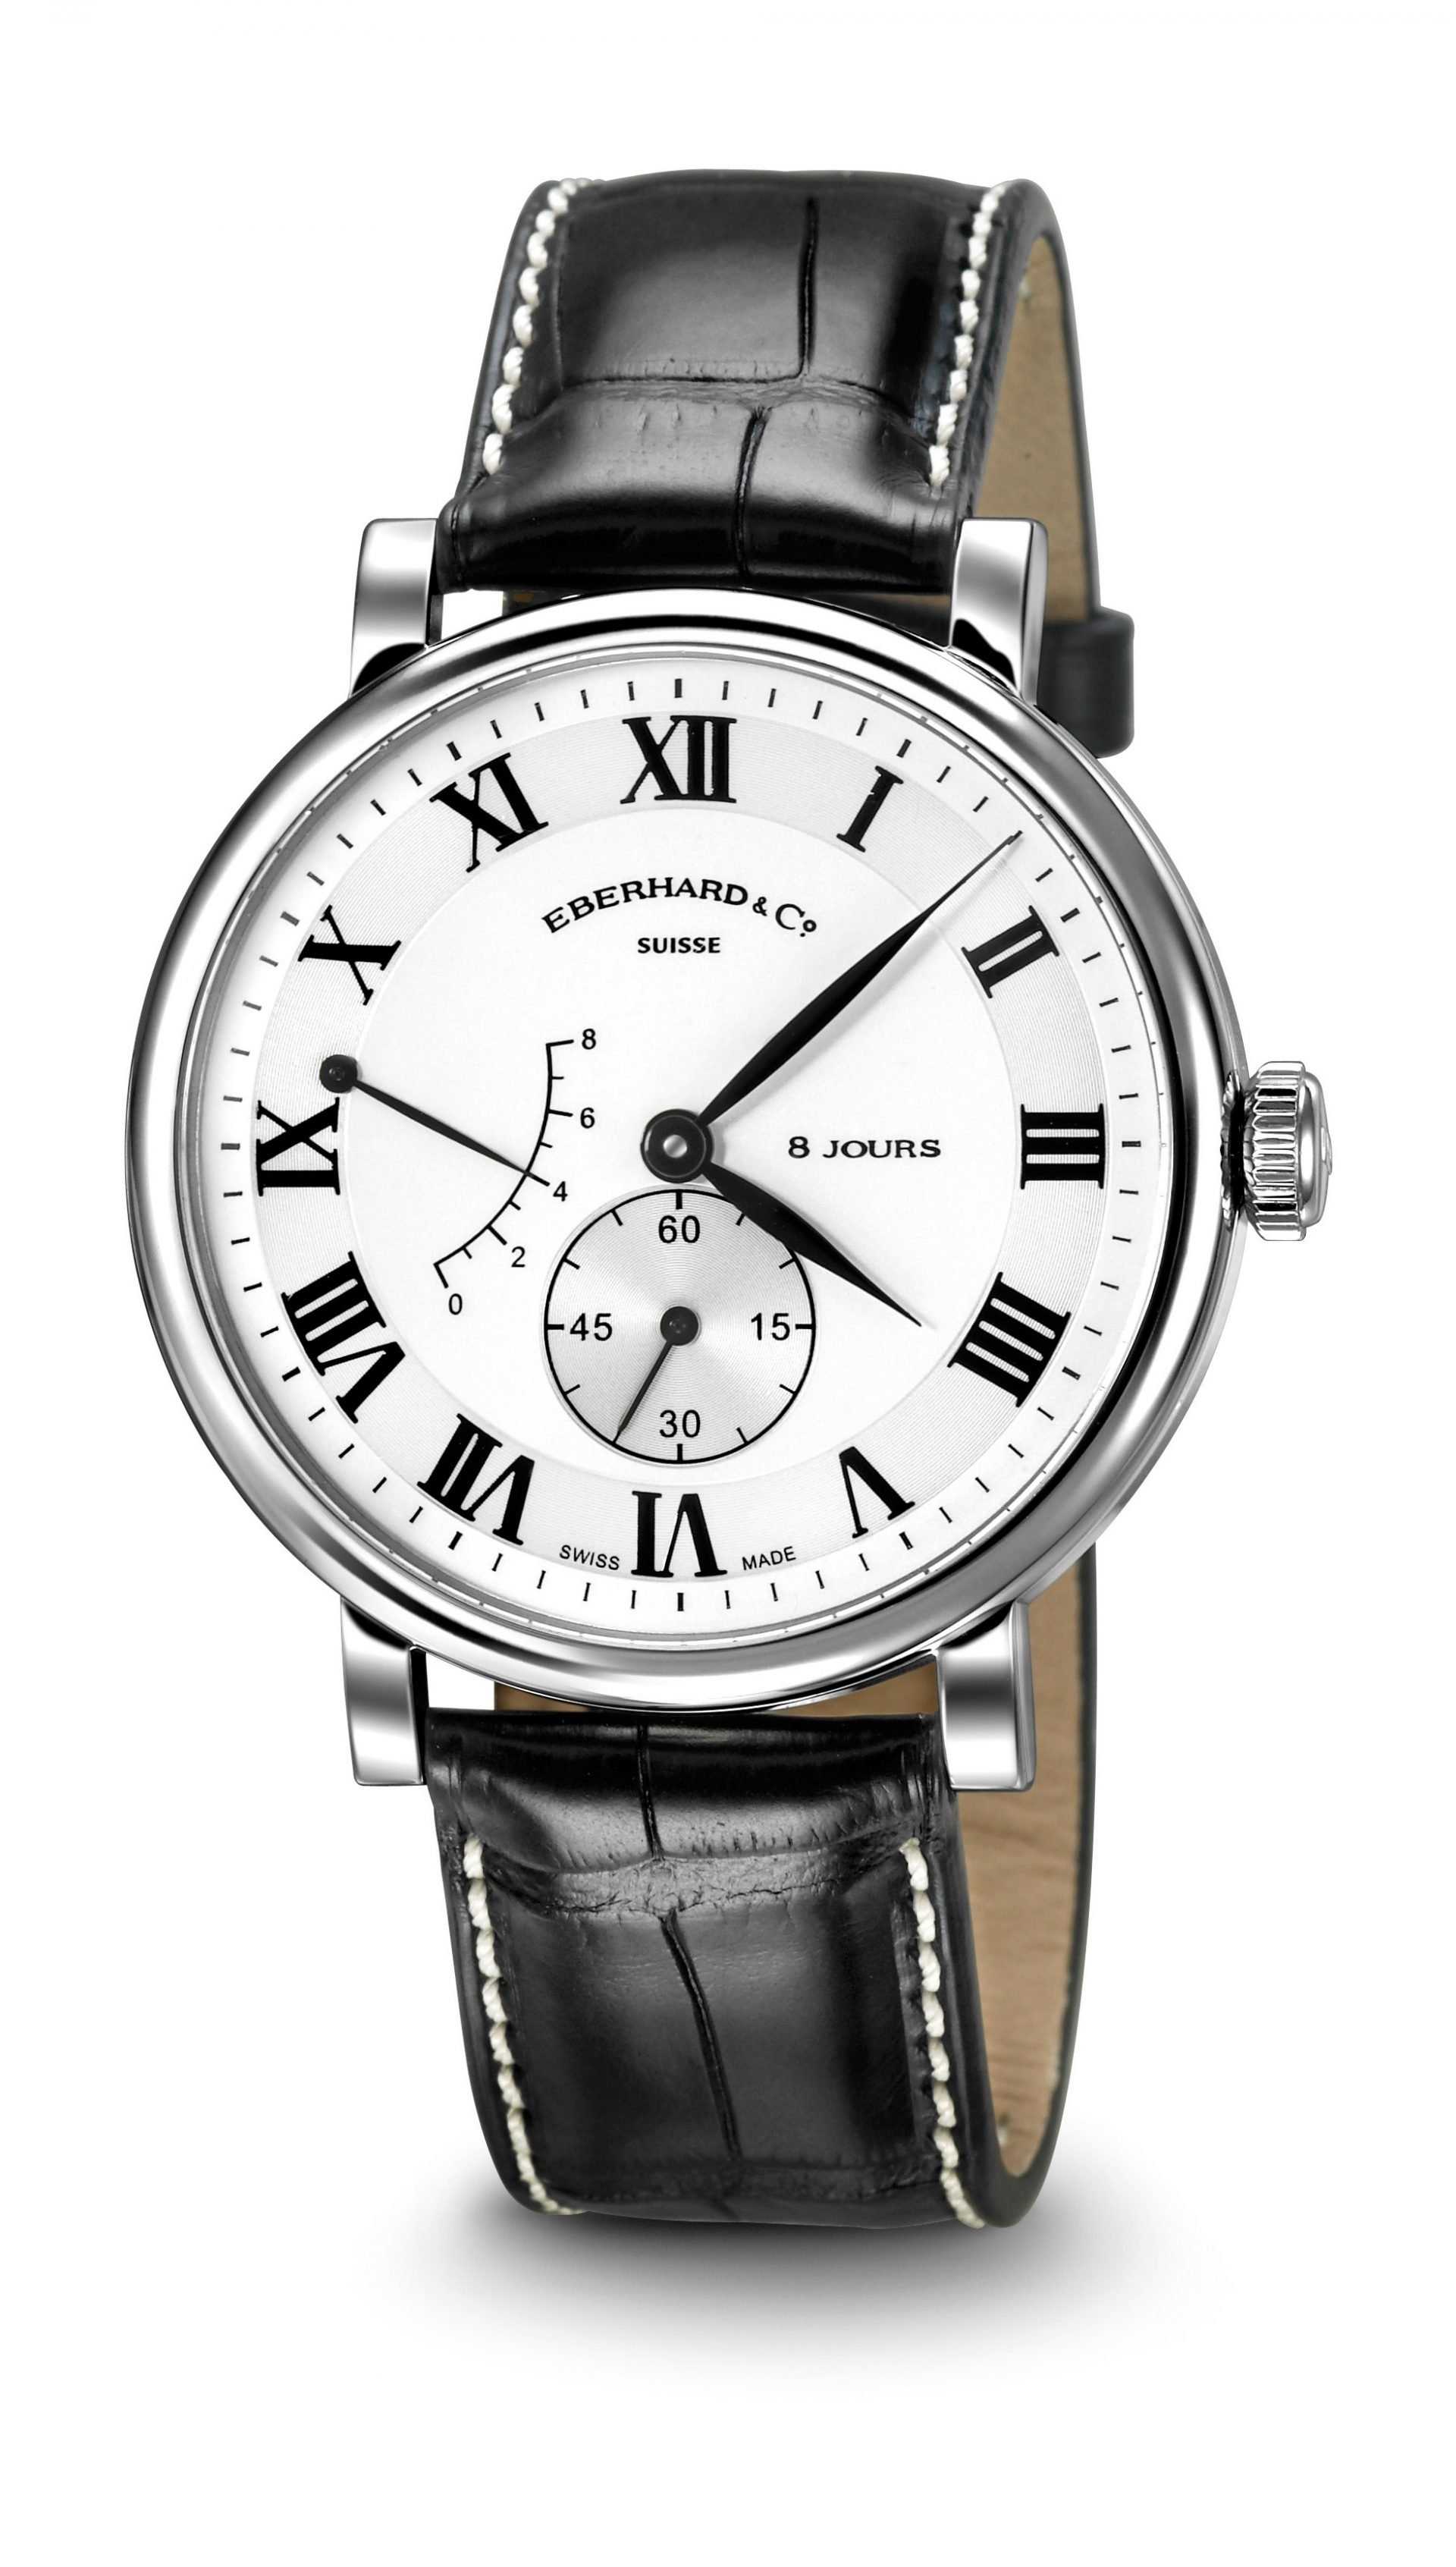 EBERHARD Mod. 8 JOURS GRAND TAILLE